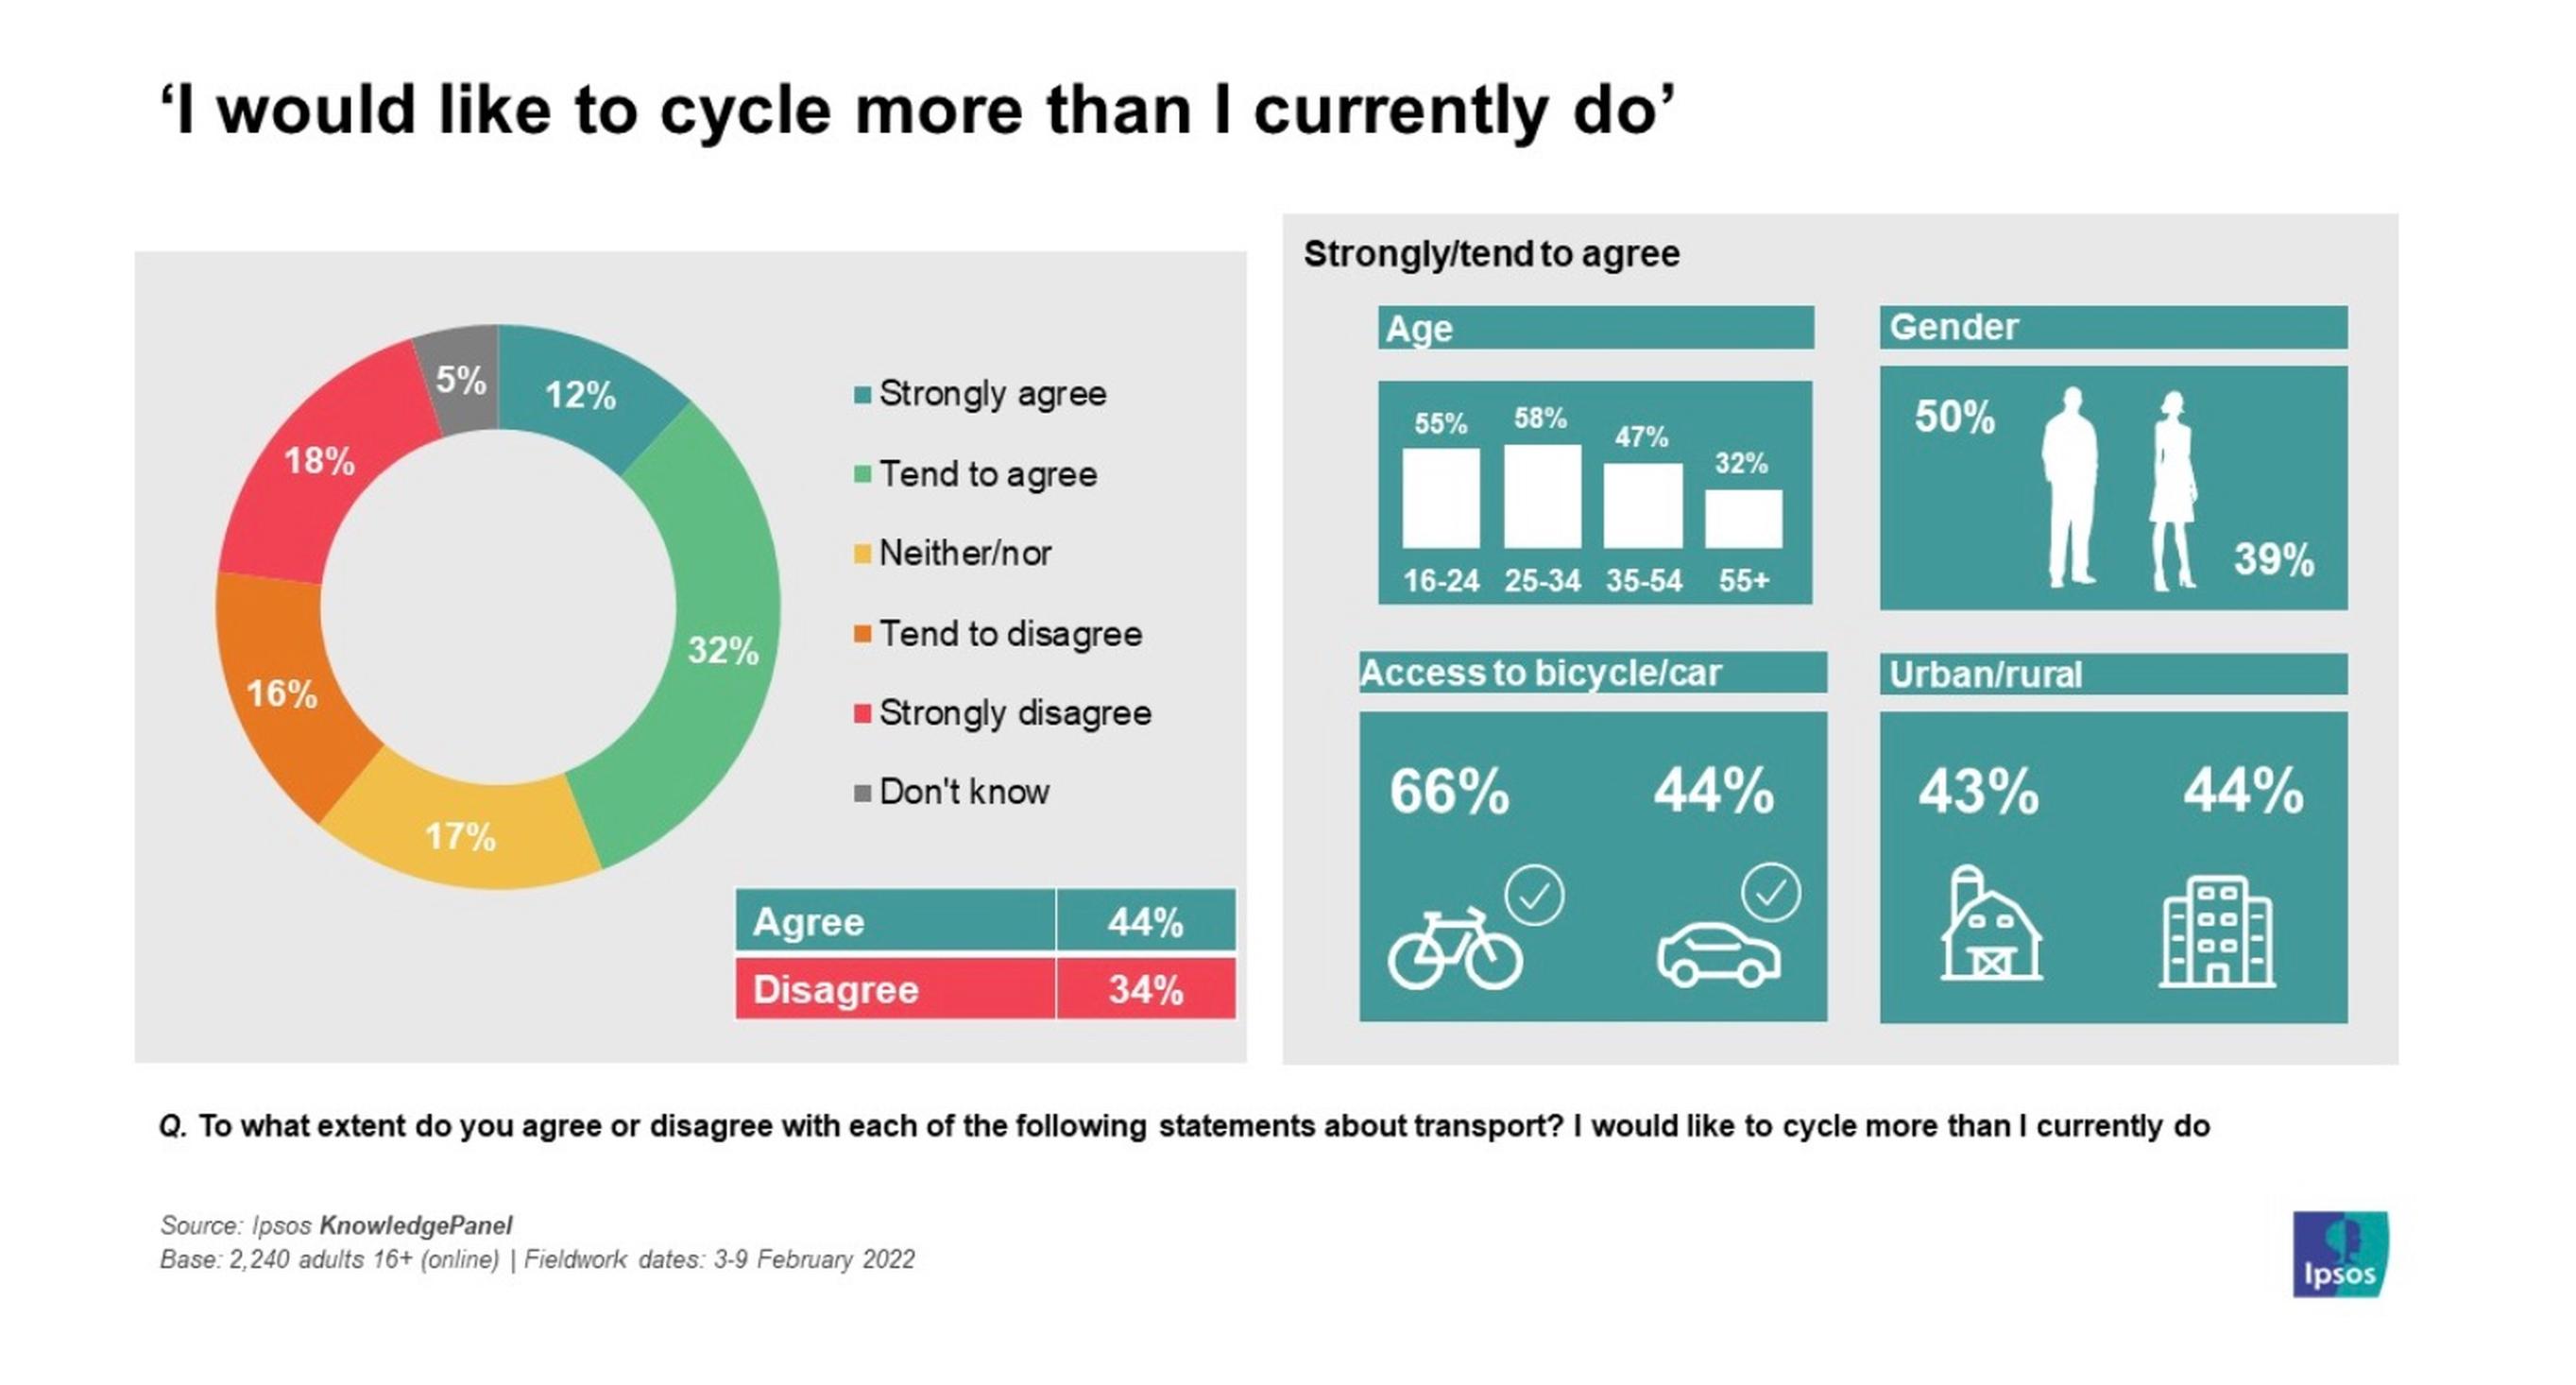 Car is still king… but more want to start cycling, research suggests